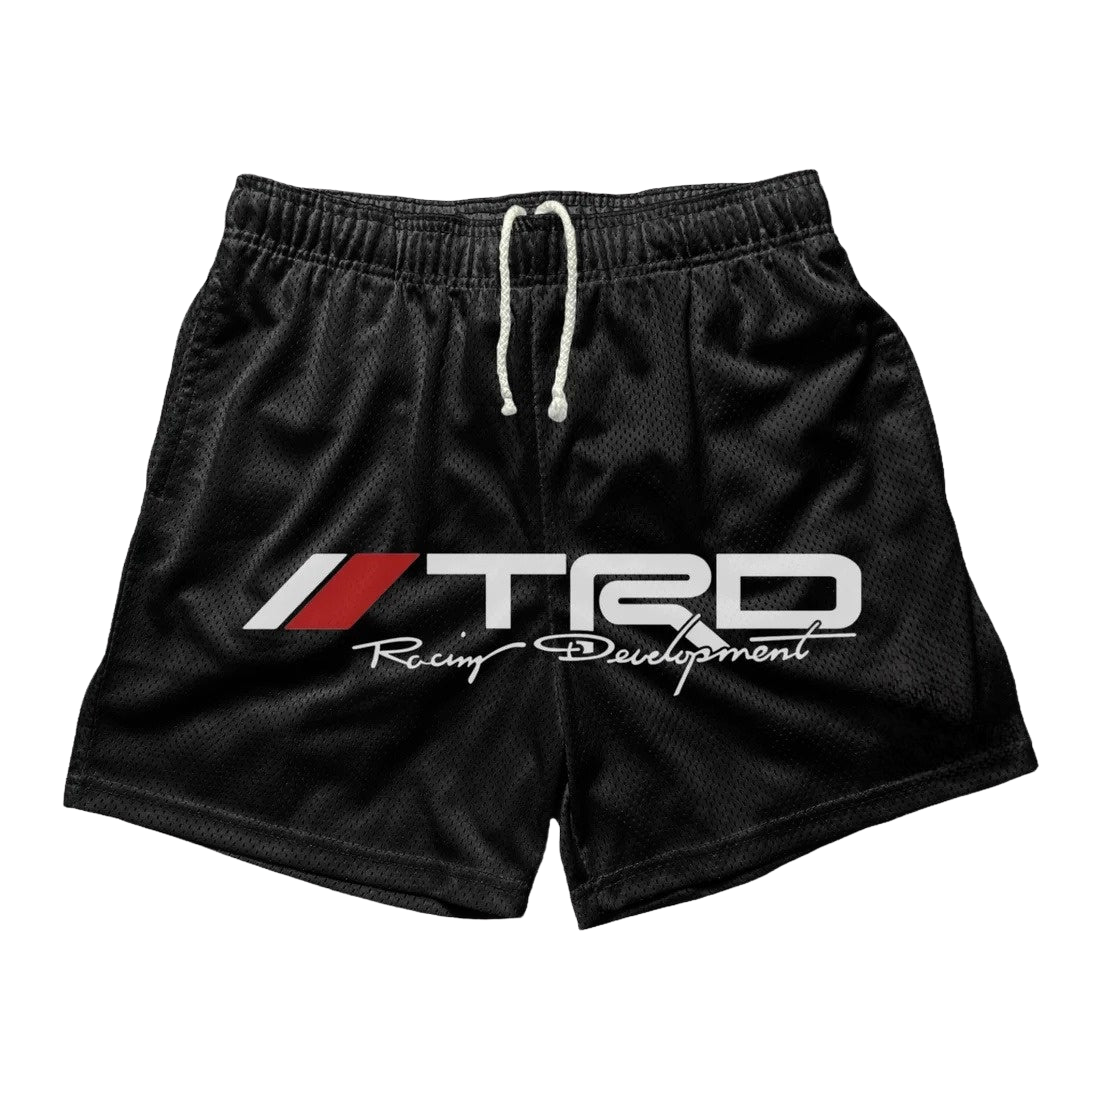 a black shorts with a red and white logo